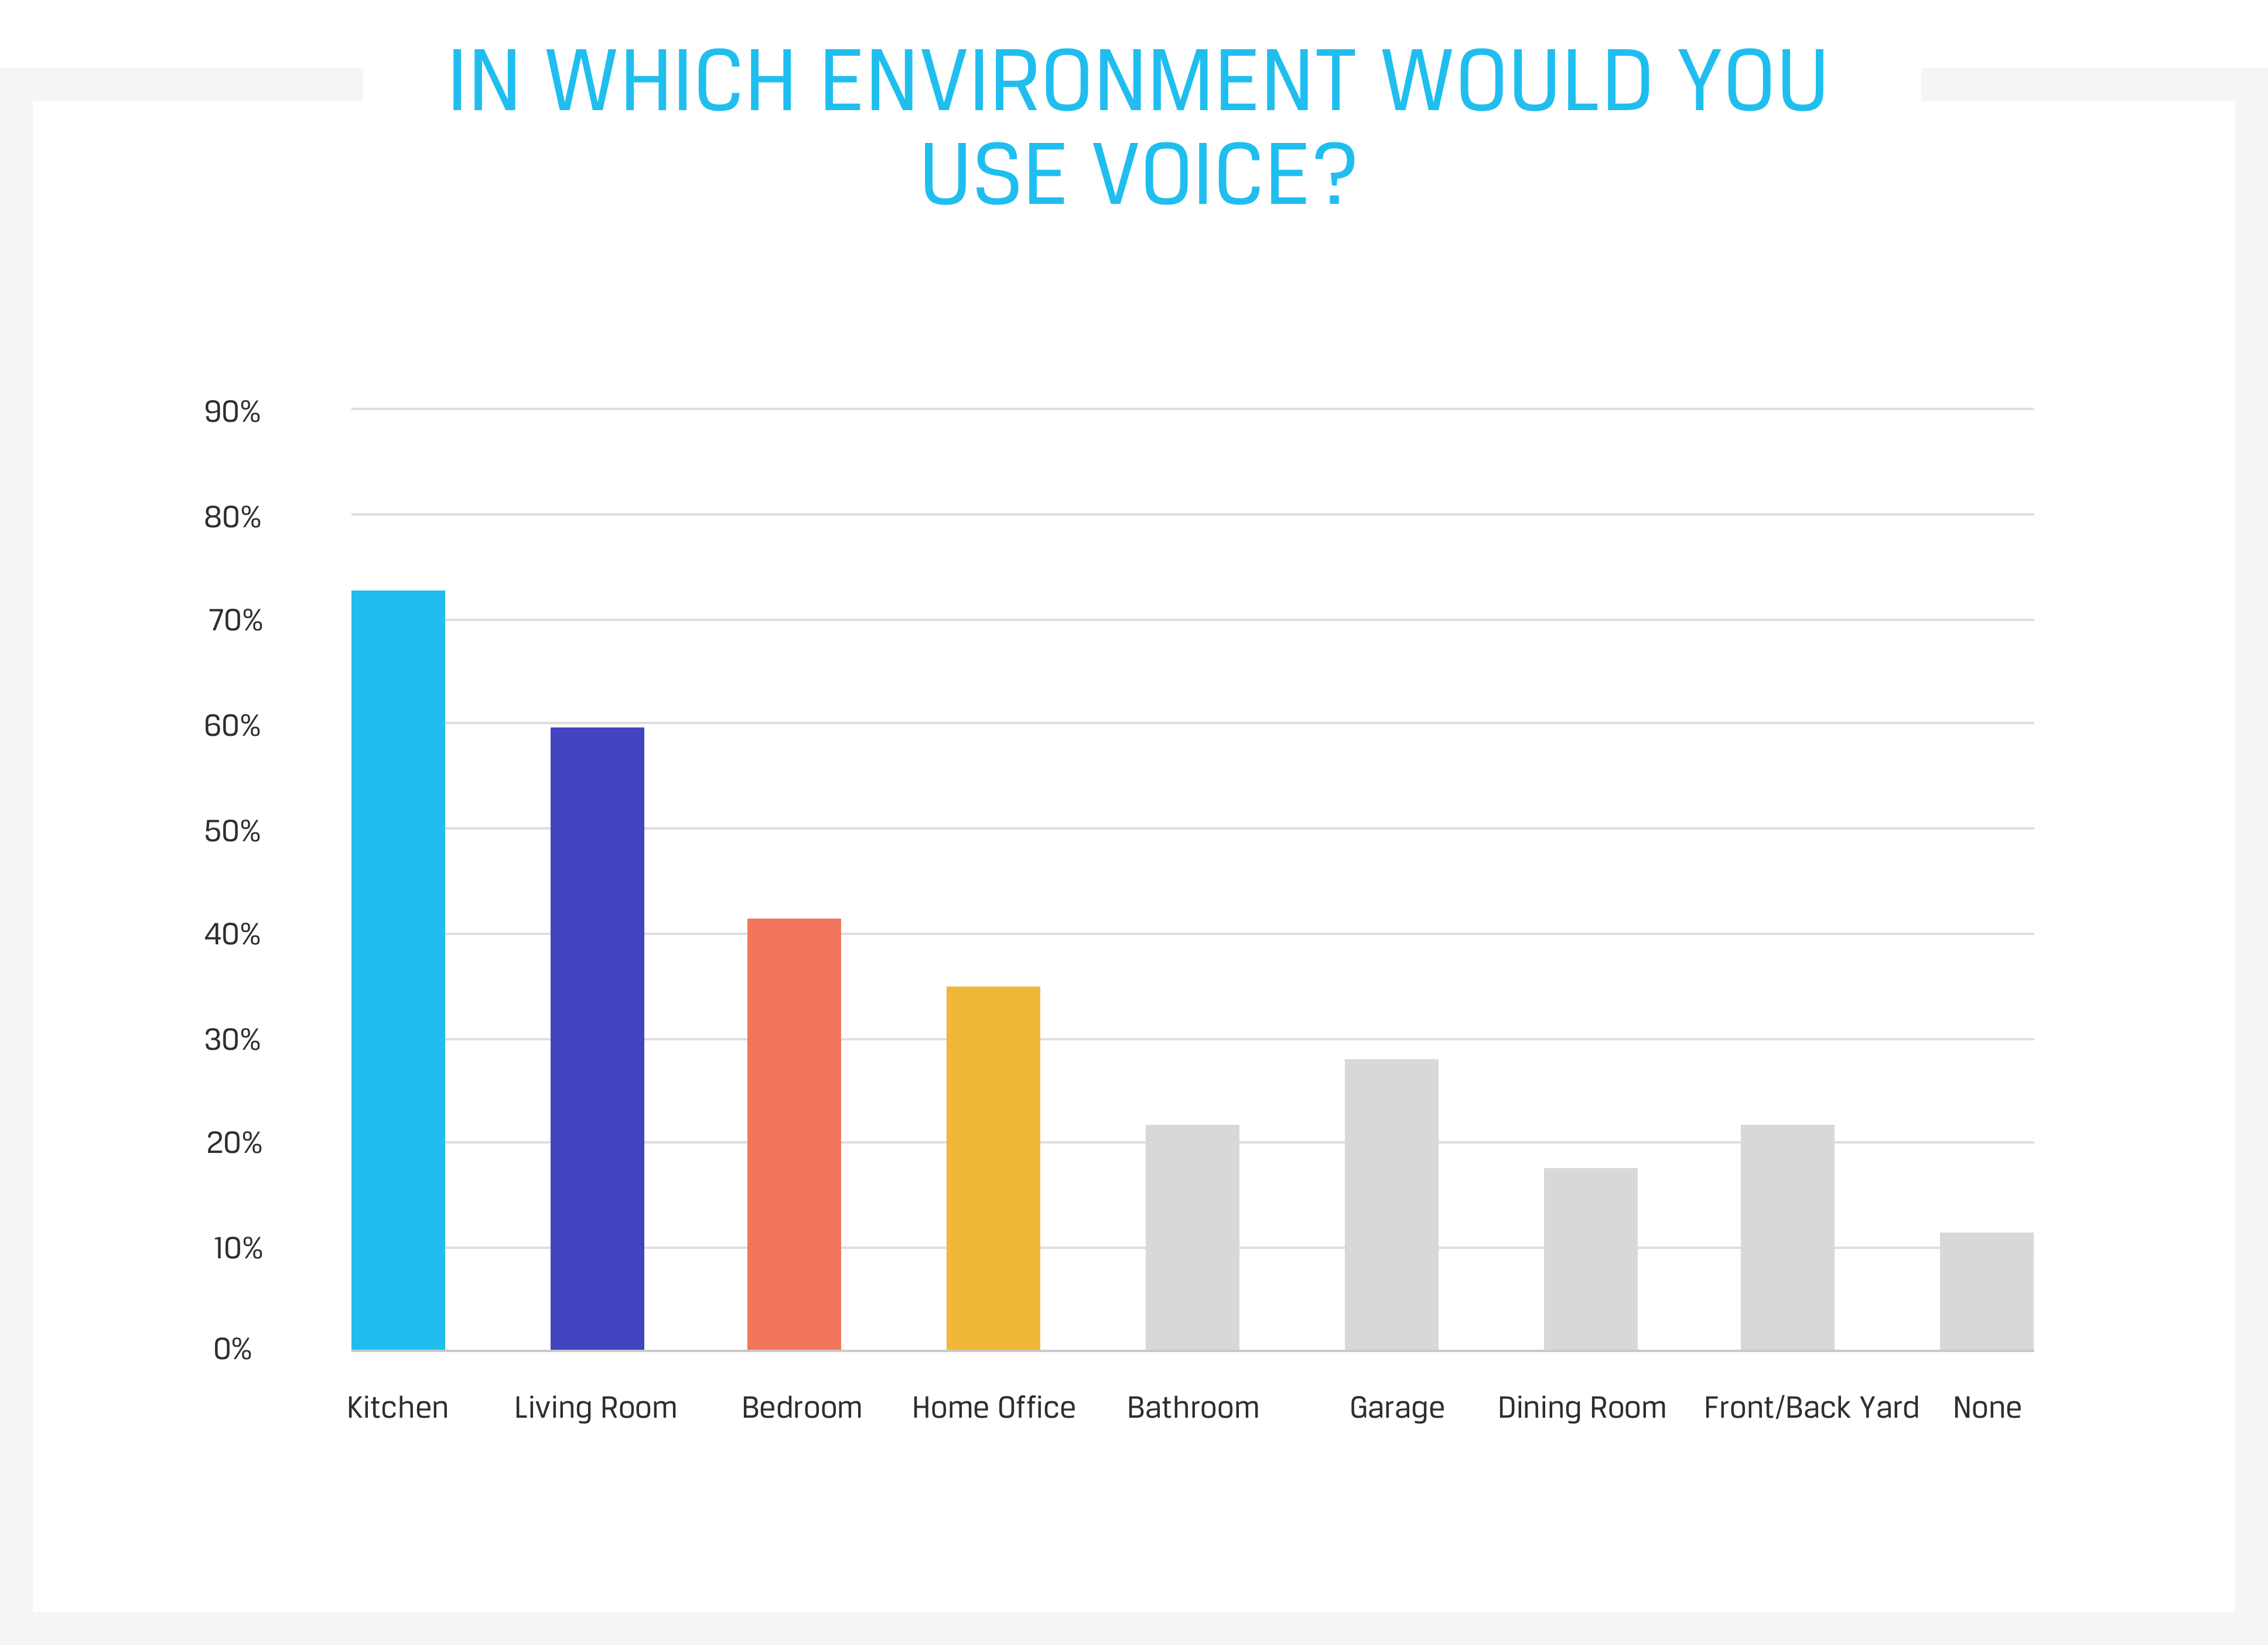 In which environment would you use voice?